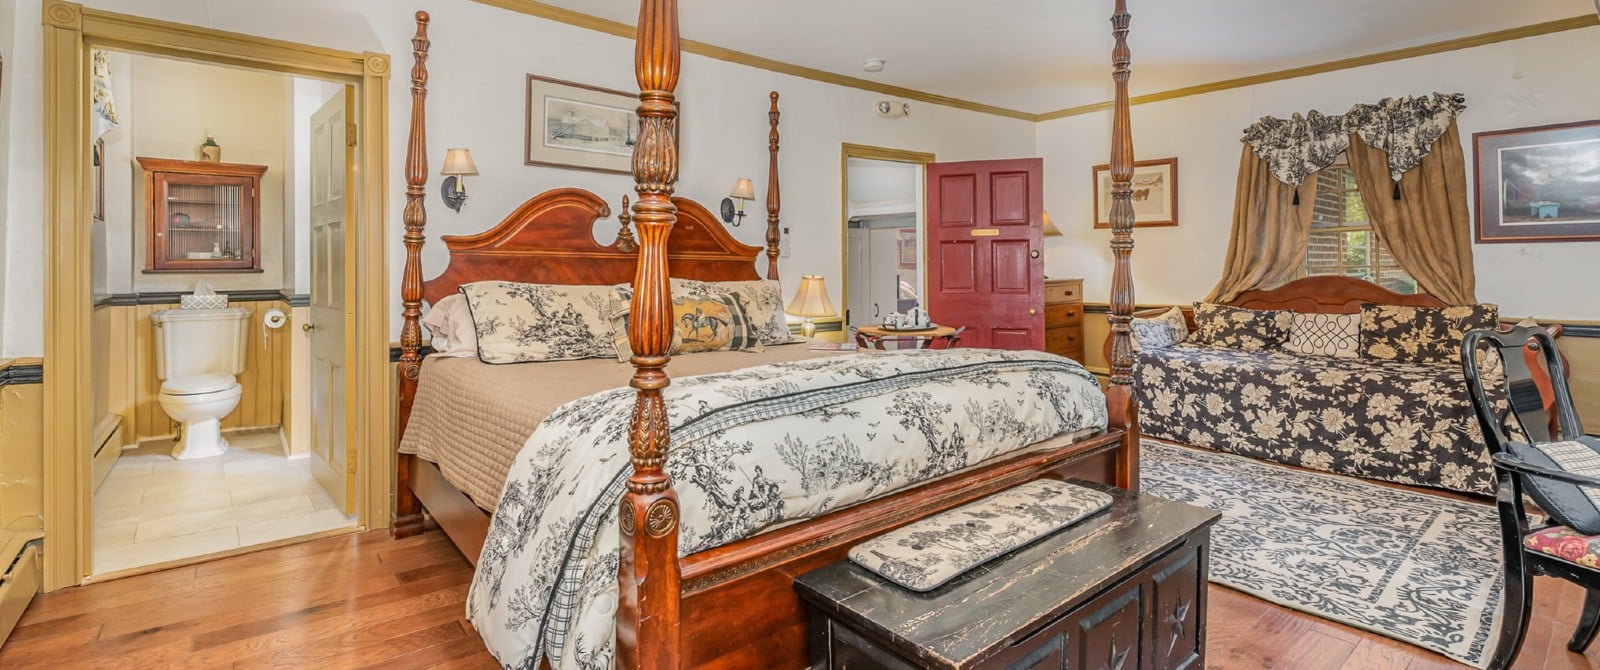 Large bedroom with four-poster bed, floral couch, hardwood floors and doorway into a bathroom